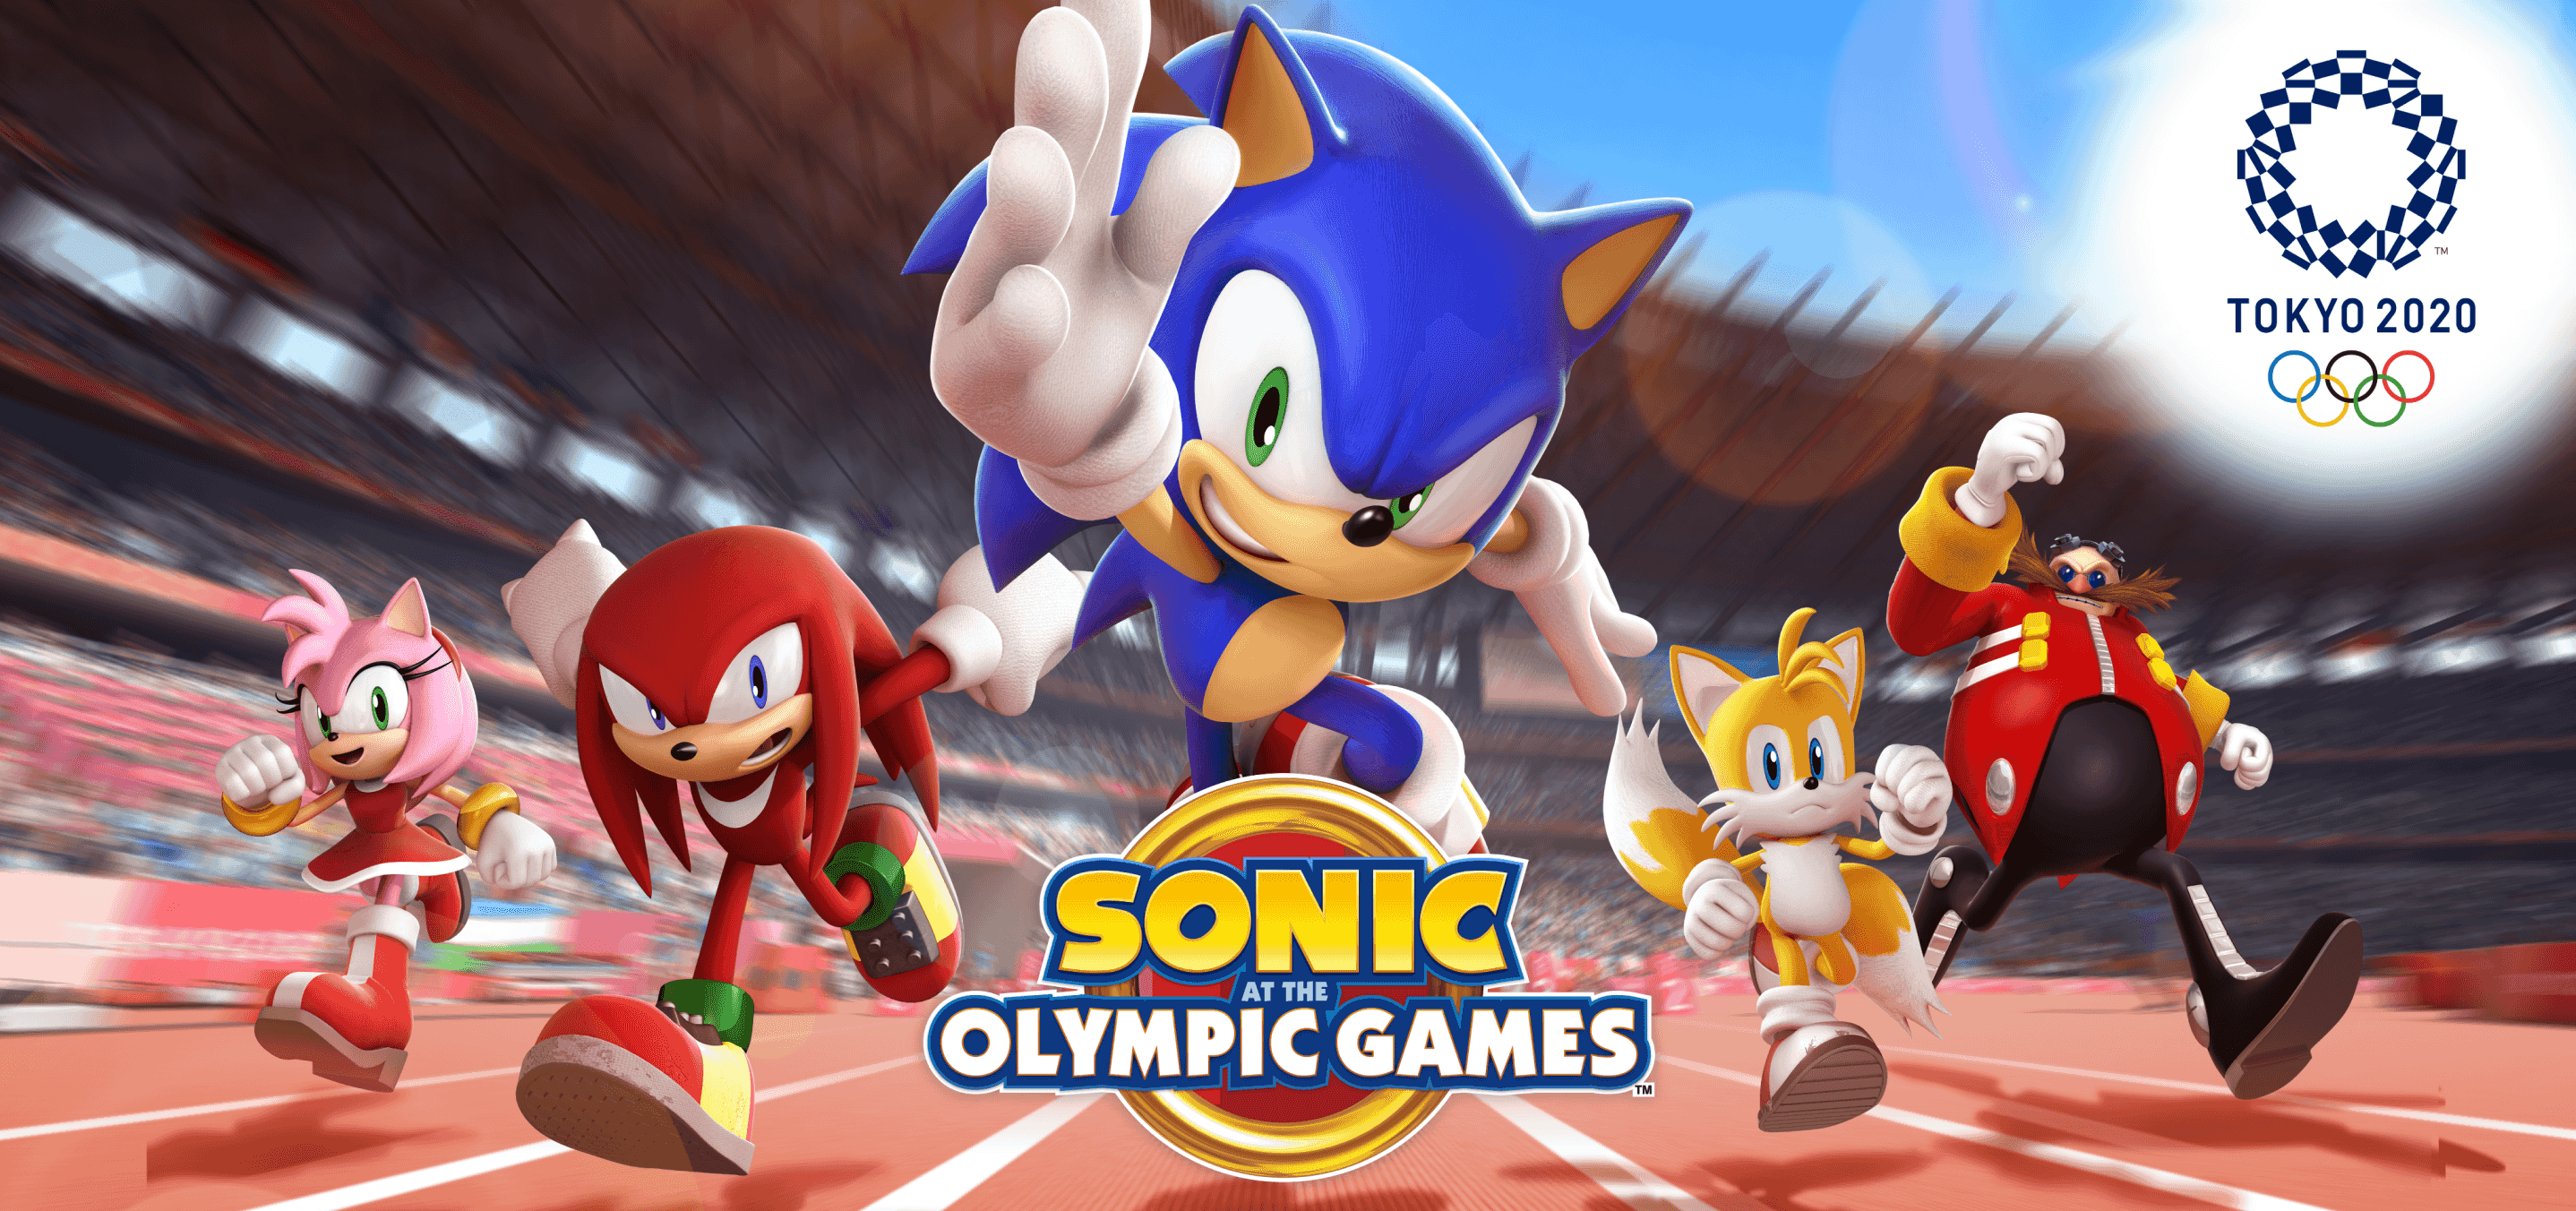 Sonic At The Olympic Games Tokyo